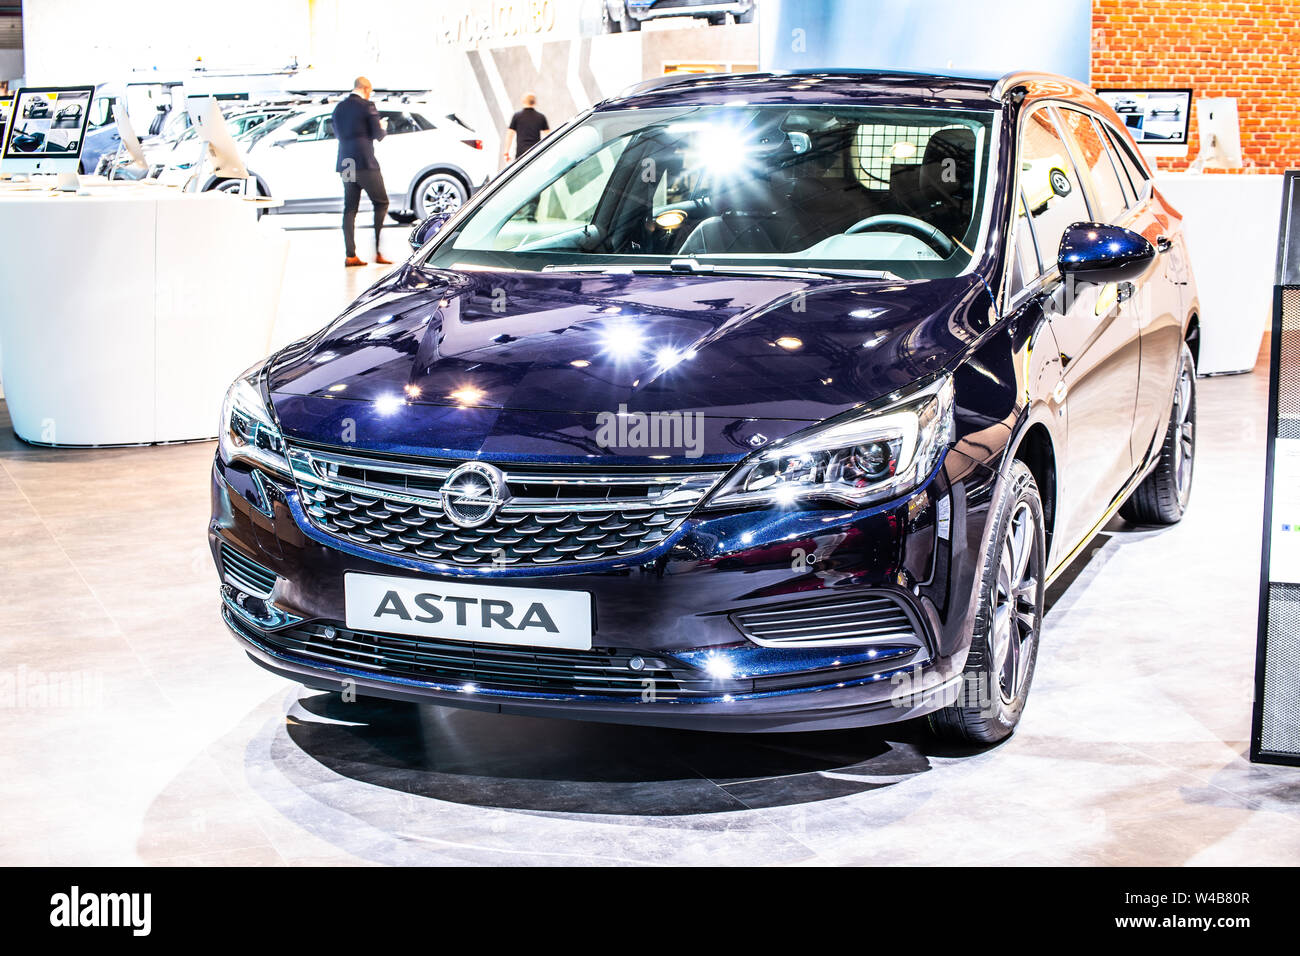 Brussels, Jan 2019: OPEL ASTRA SPORTS TOURER, Brussels Motor Show, 5th gen Astra  K, D2XX platform, small family car produced by Opel (PSA Group Stock Photo  - Alamy